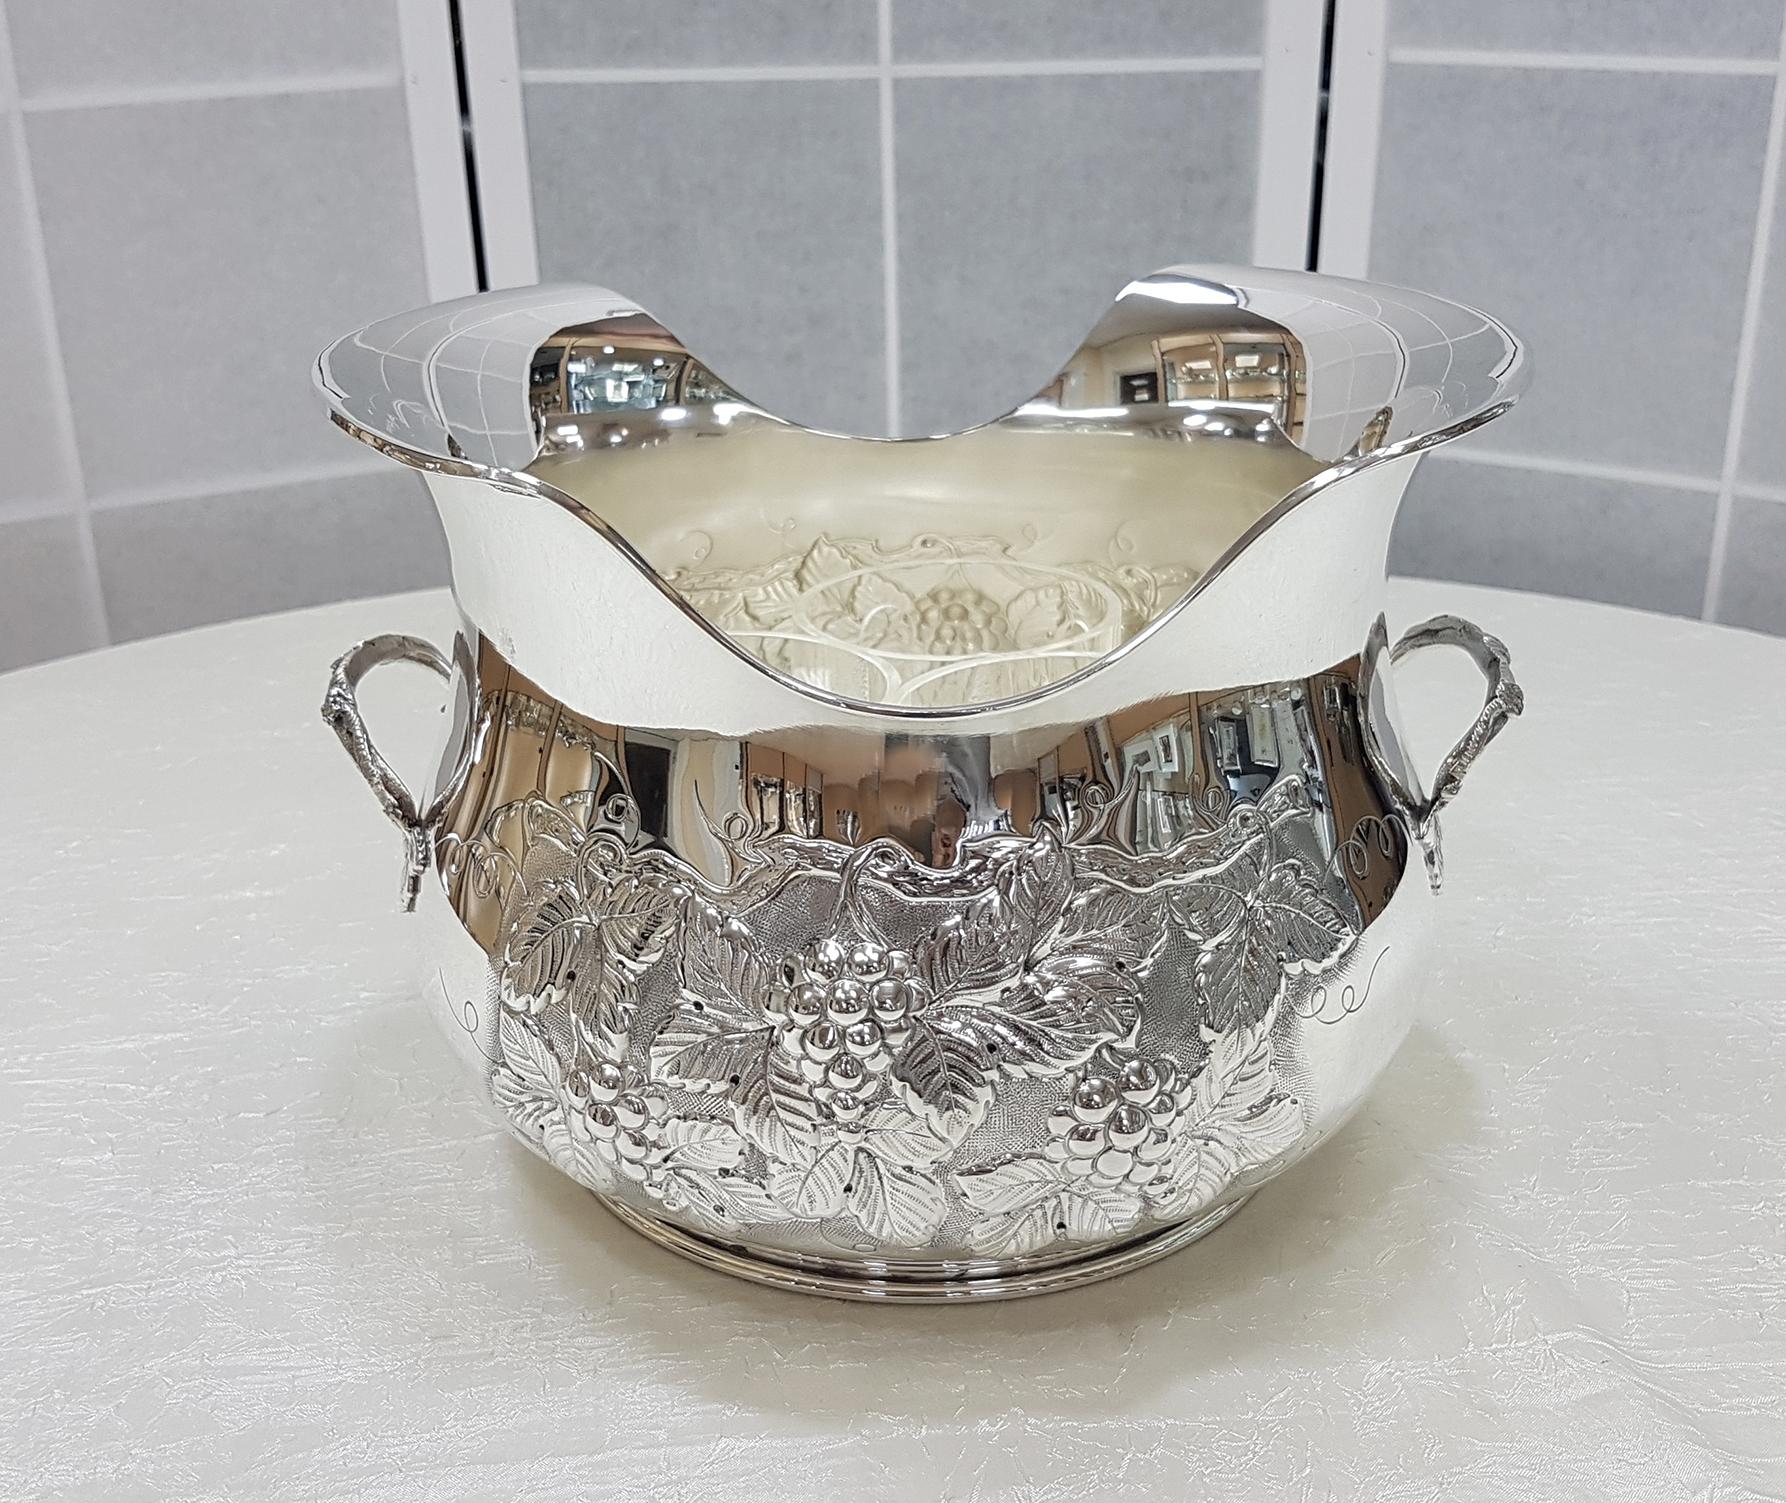 Gorgeous champagne bucket completely handmade, embossed, chiseled by hand with a design of bunches of grapes and leaves. The shape is round and with a shaped upper edge. The champagne bucket is completed by two solid handles, also in solid silver,